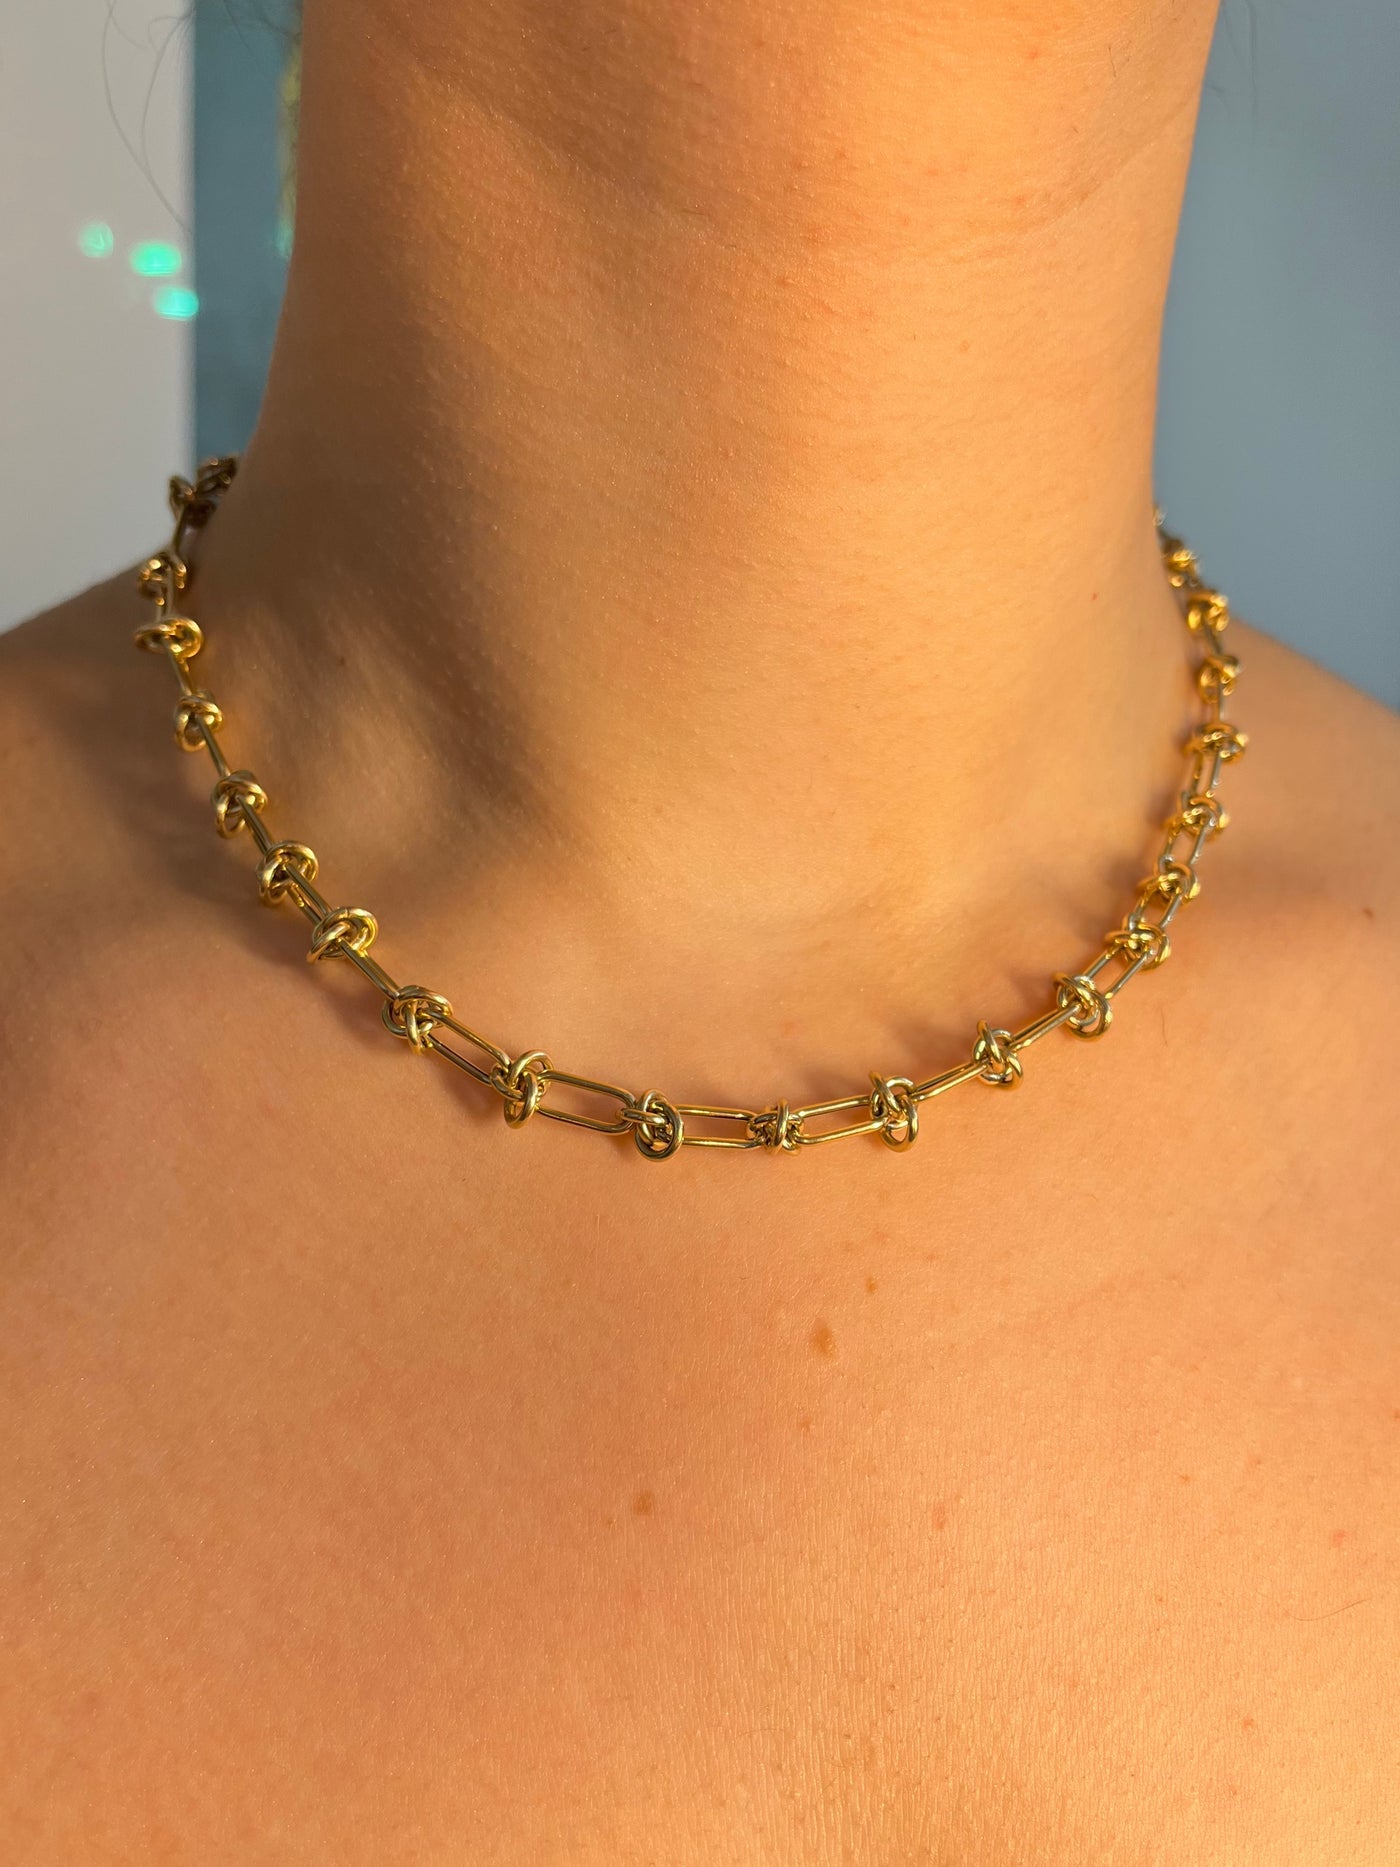 The Love-Knot Paperclip Necklace